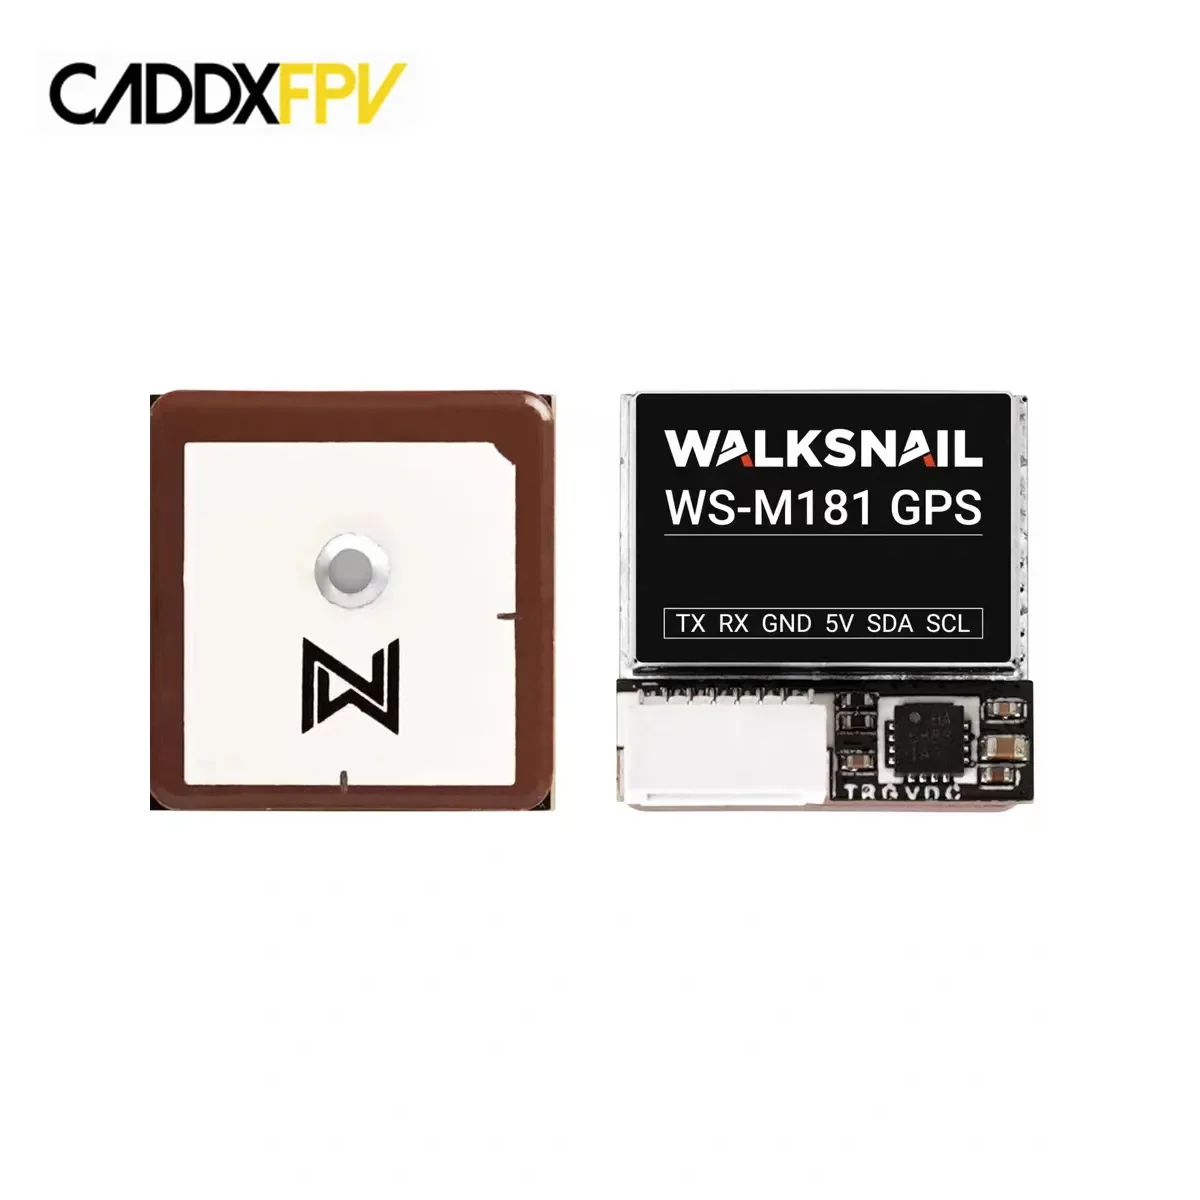 

Walksnail WS-M181 GPS M10 GNSS BUILT-IN QMC5883 Compass Ceramic Antenna for RC Airplane FPV Freestyle Long Range DIY Parts